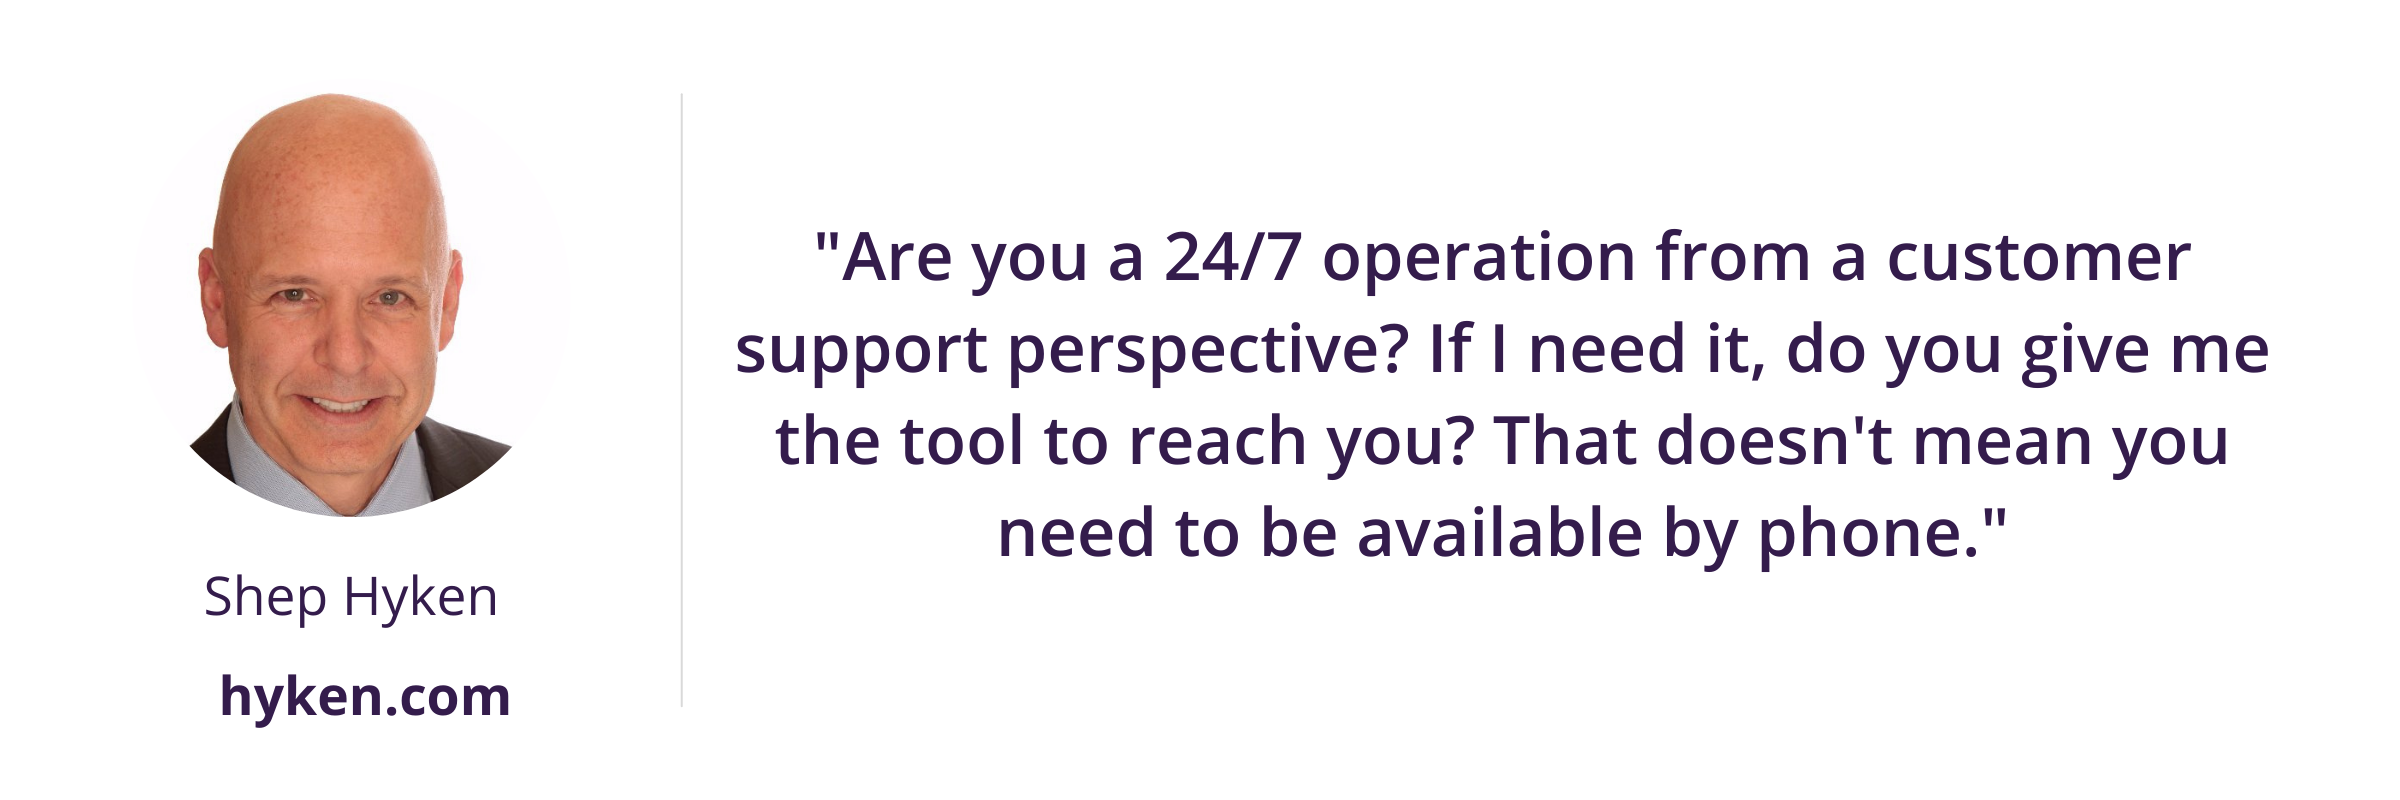 Are you a 247 operation from a customer support perspective If I need it, do you give me the tool to reach you That doesn't mean you need to be available by phone.